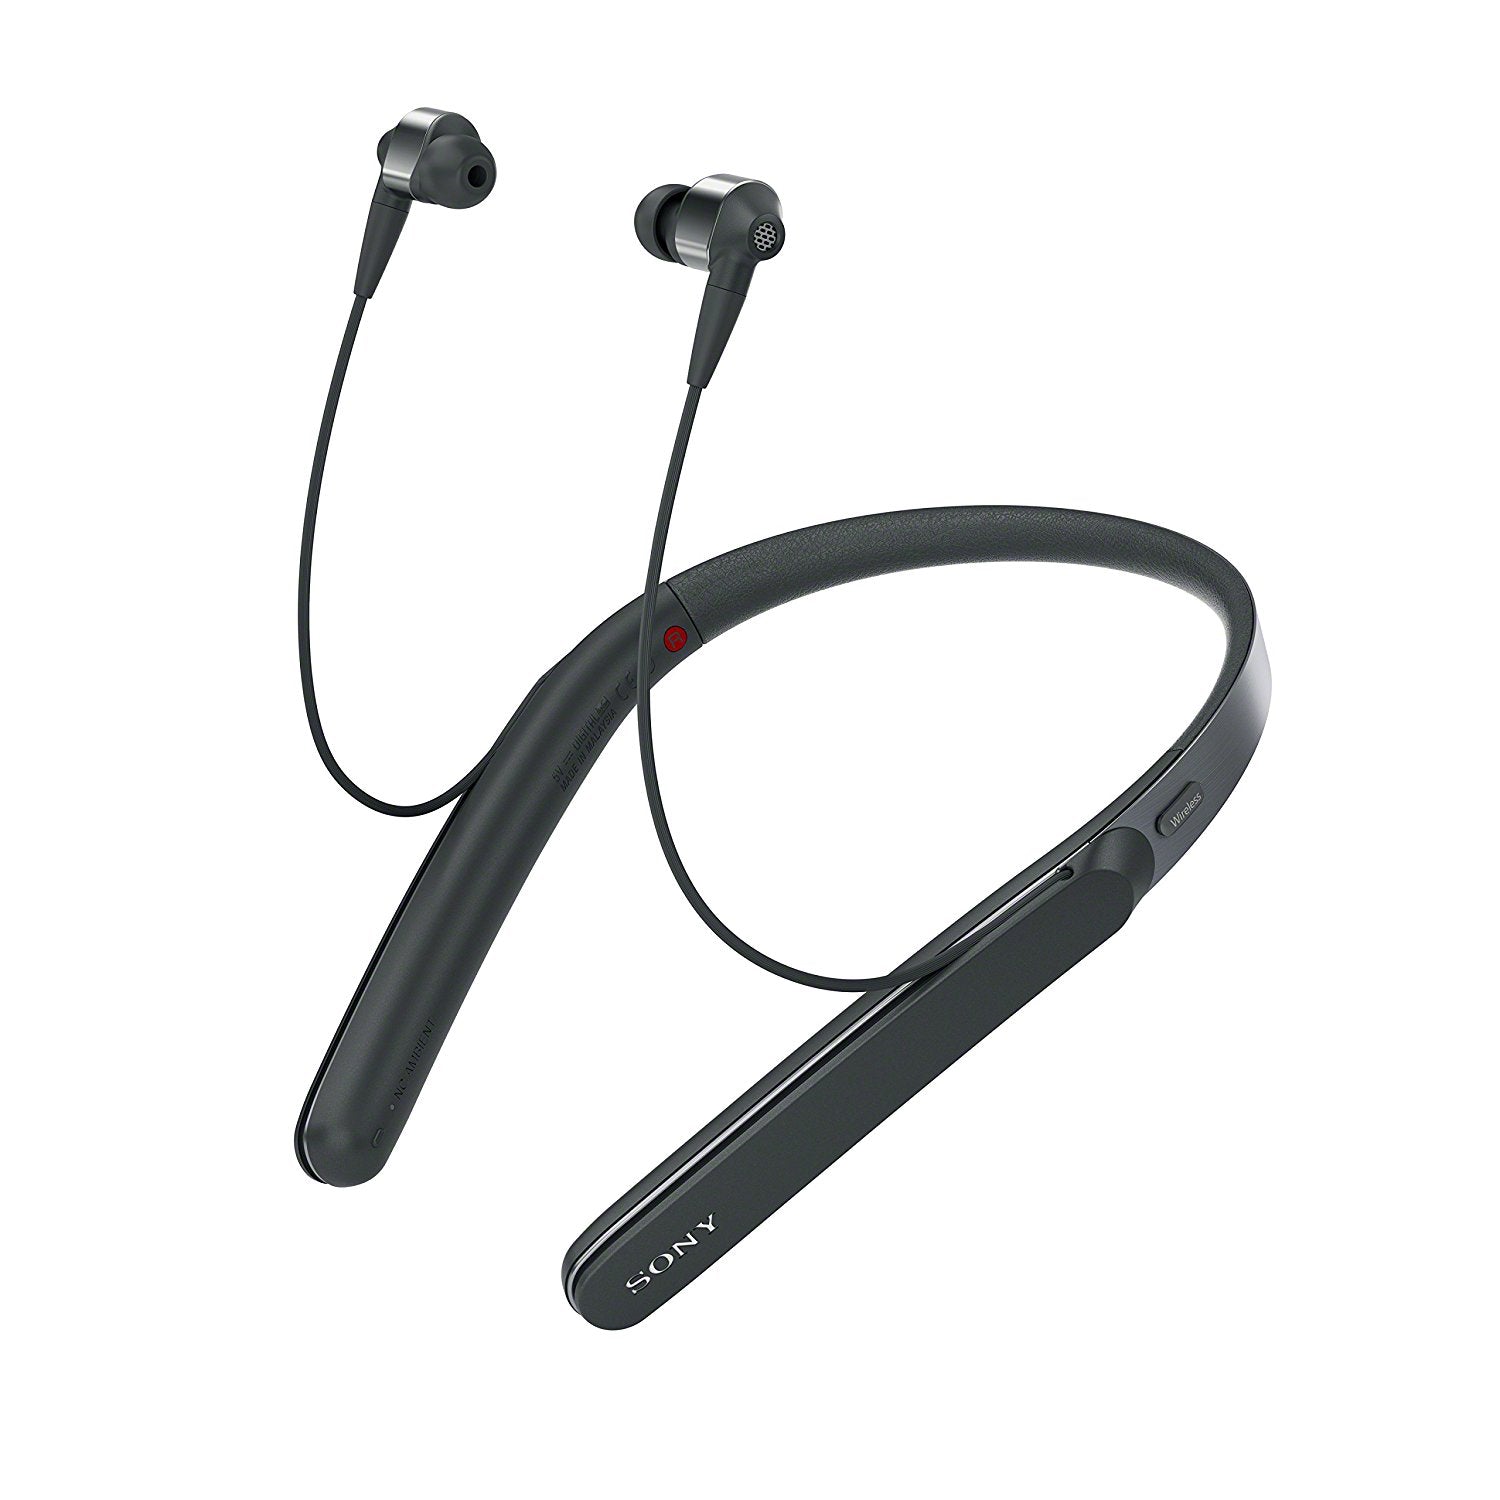 Sony WI-1000X Headphones with mic -on ear - active noise canceling